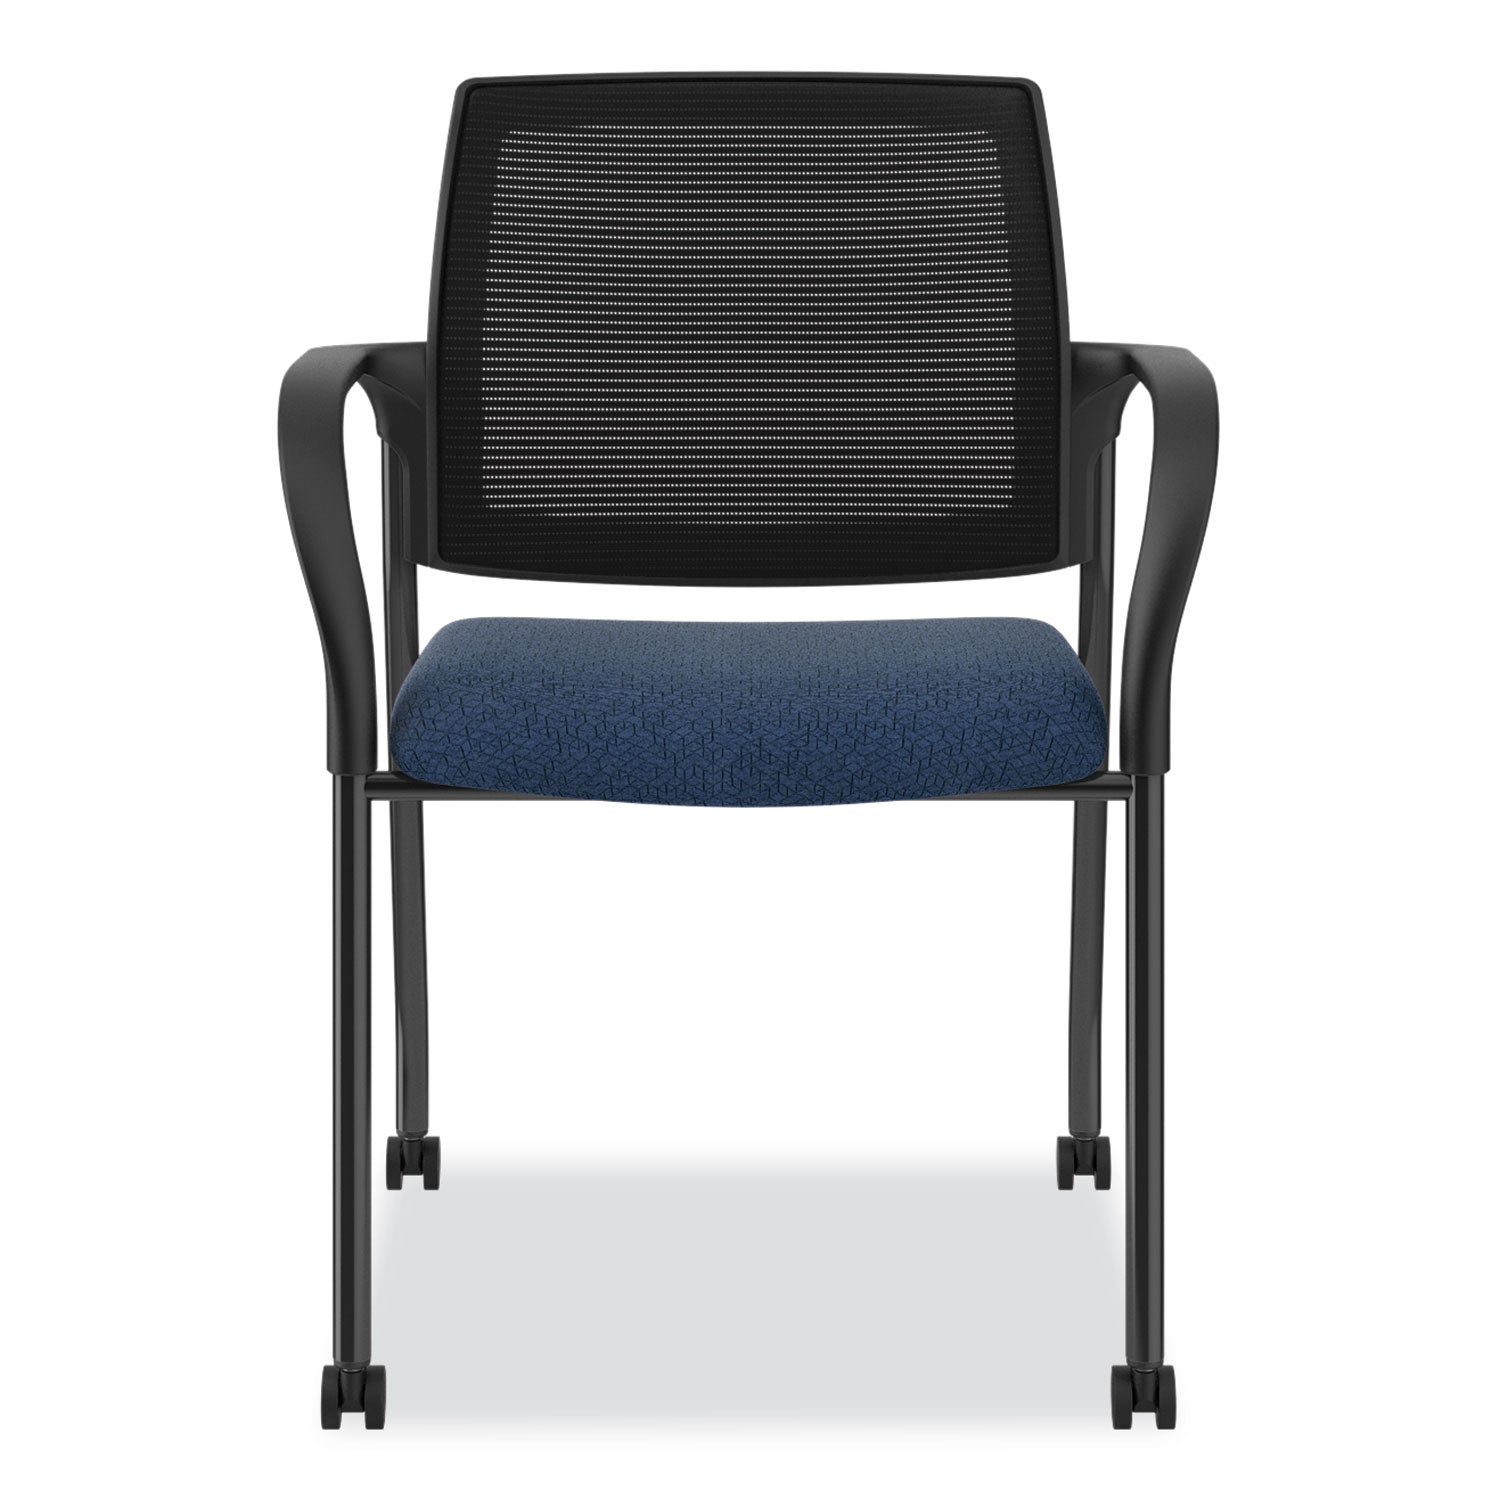 ignition-series-guest-chair-with-arms-25-x-2175-x-335-navy-seat-black-back-black-base-ships-in-7-10-business-days_honis107imapx13 - 4